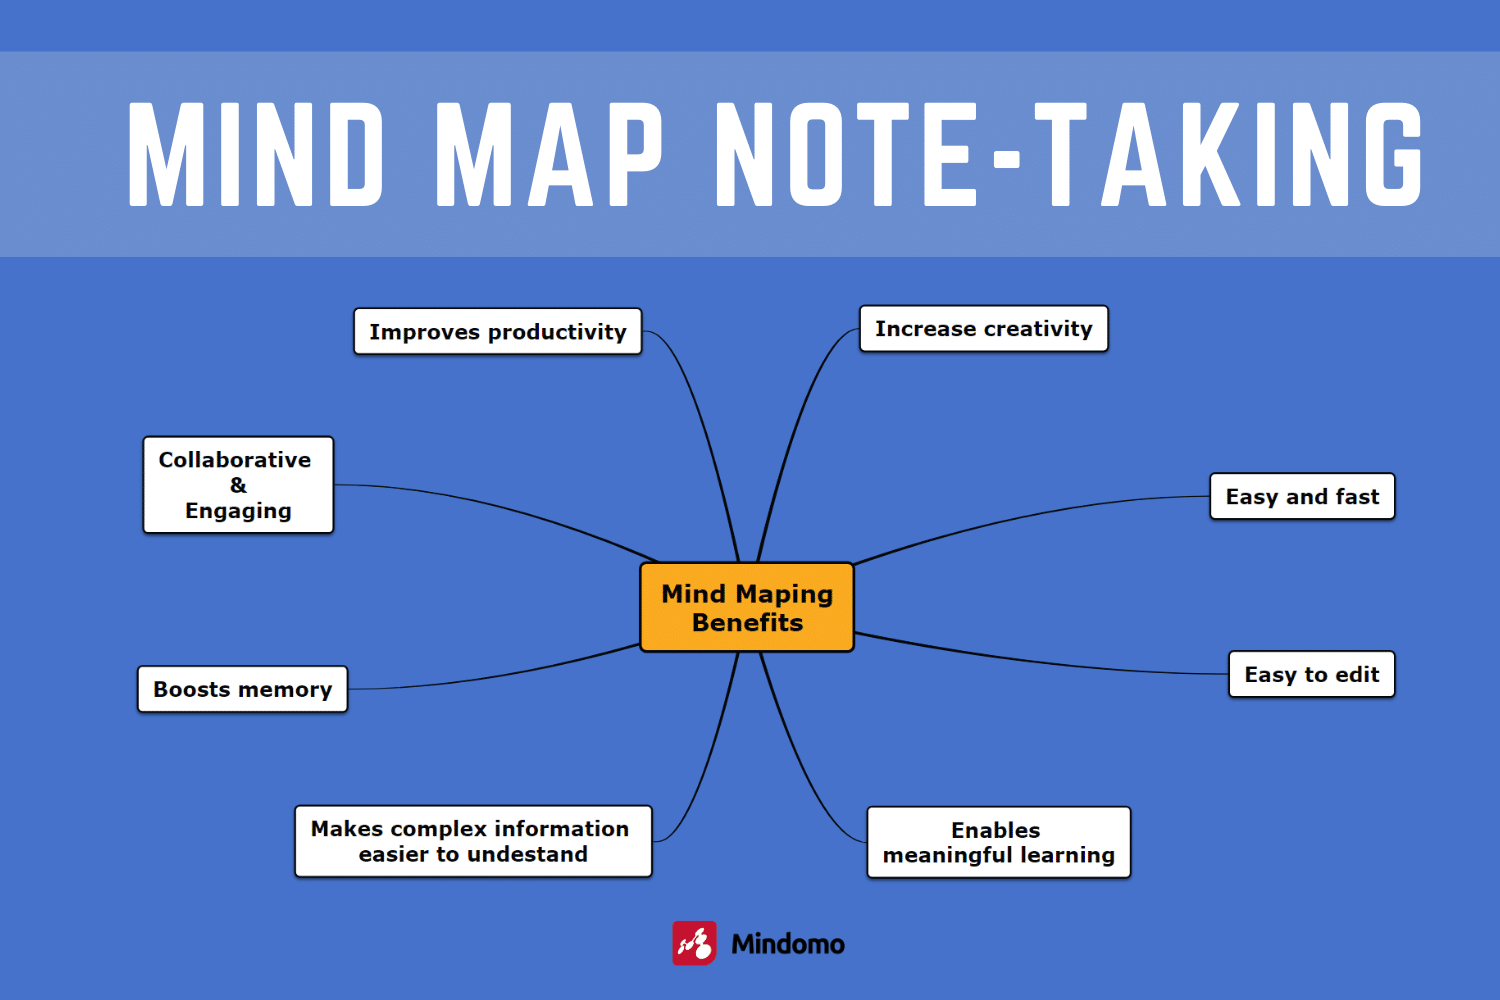 Mind map note-taking is more efficient